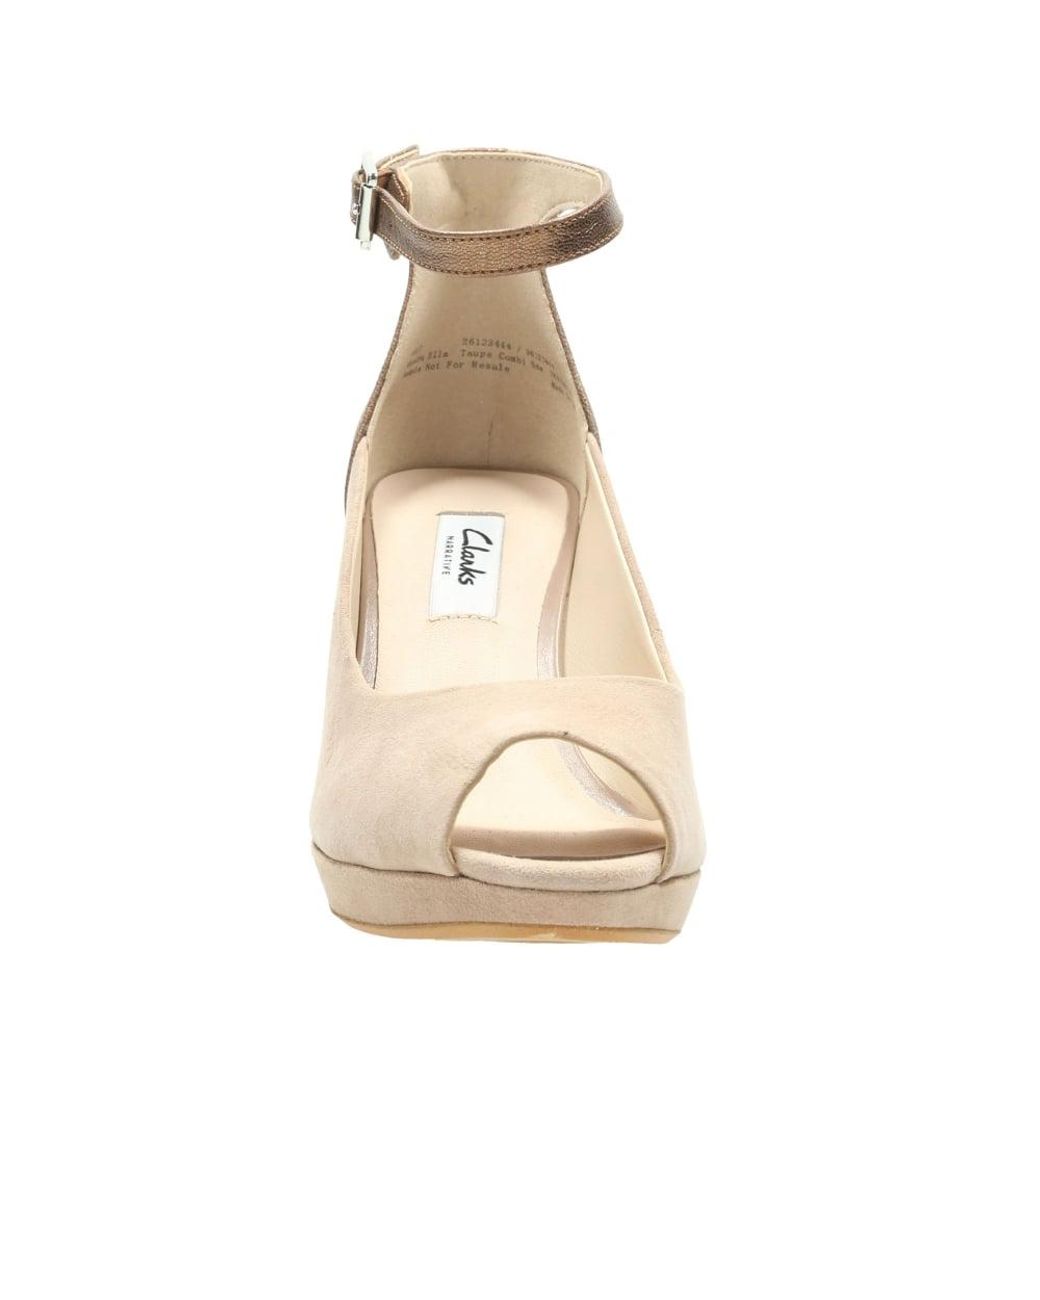 Clarks Kendra Ella Womens Shoes in Natural | Lyst Canada